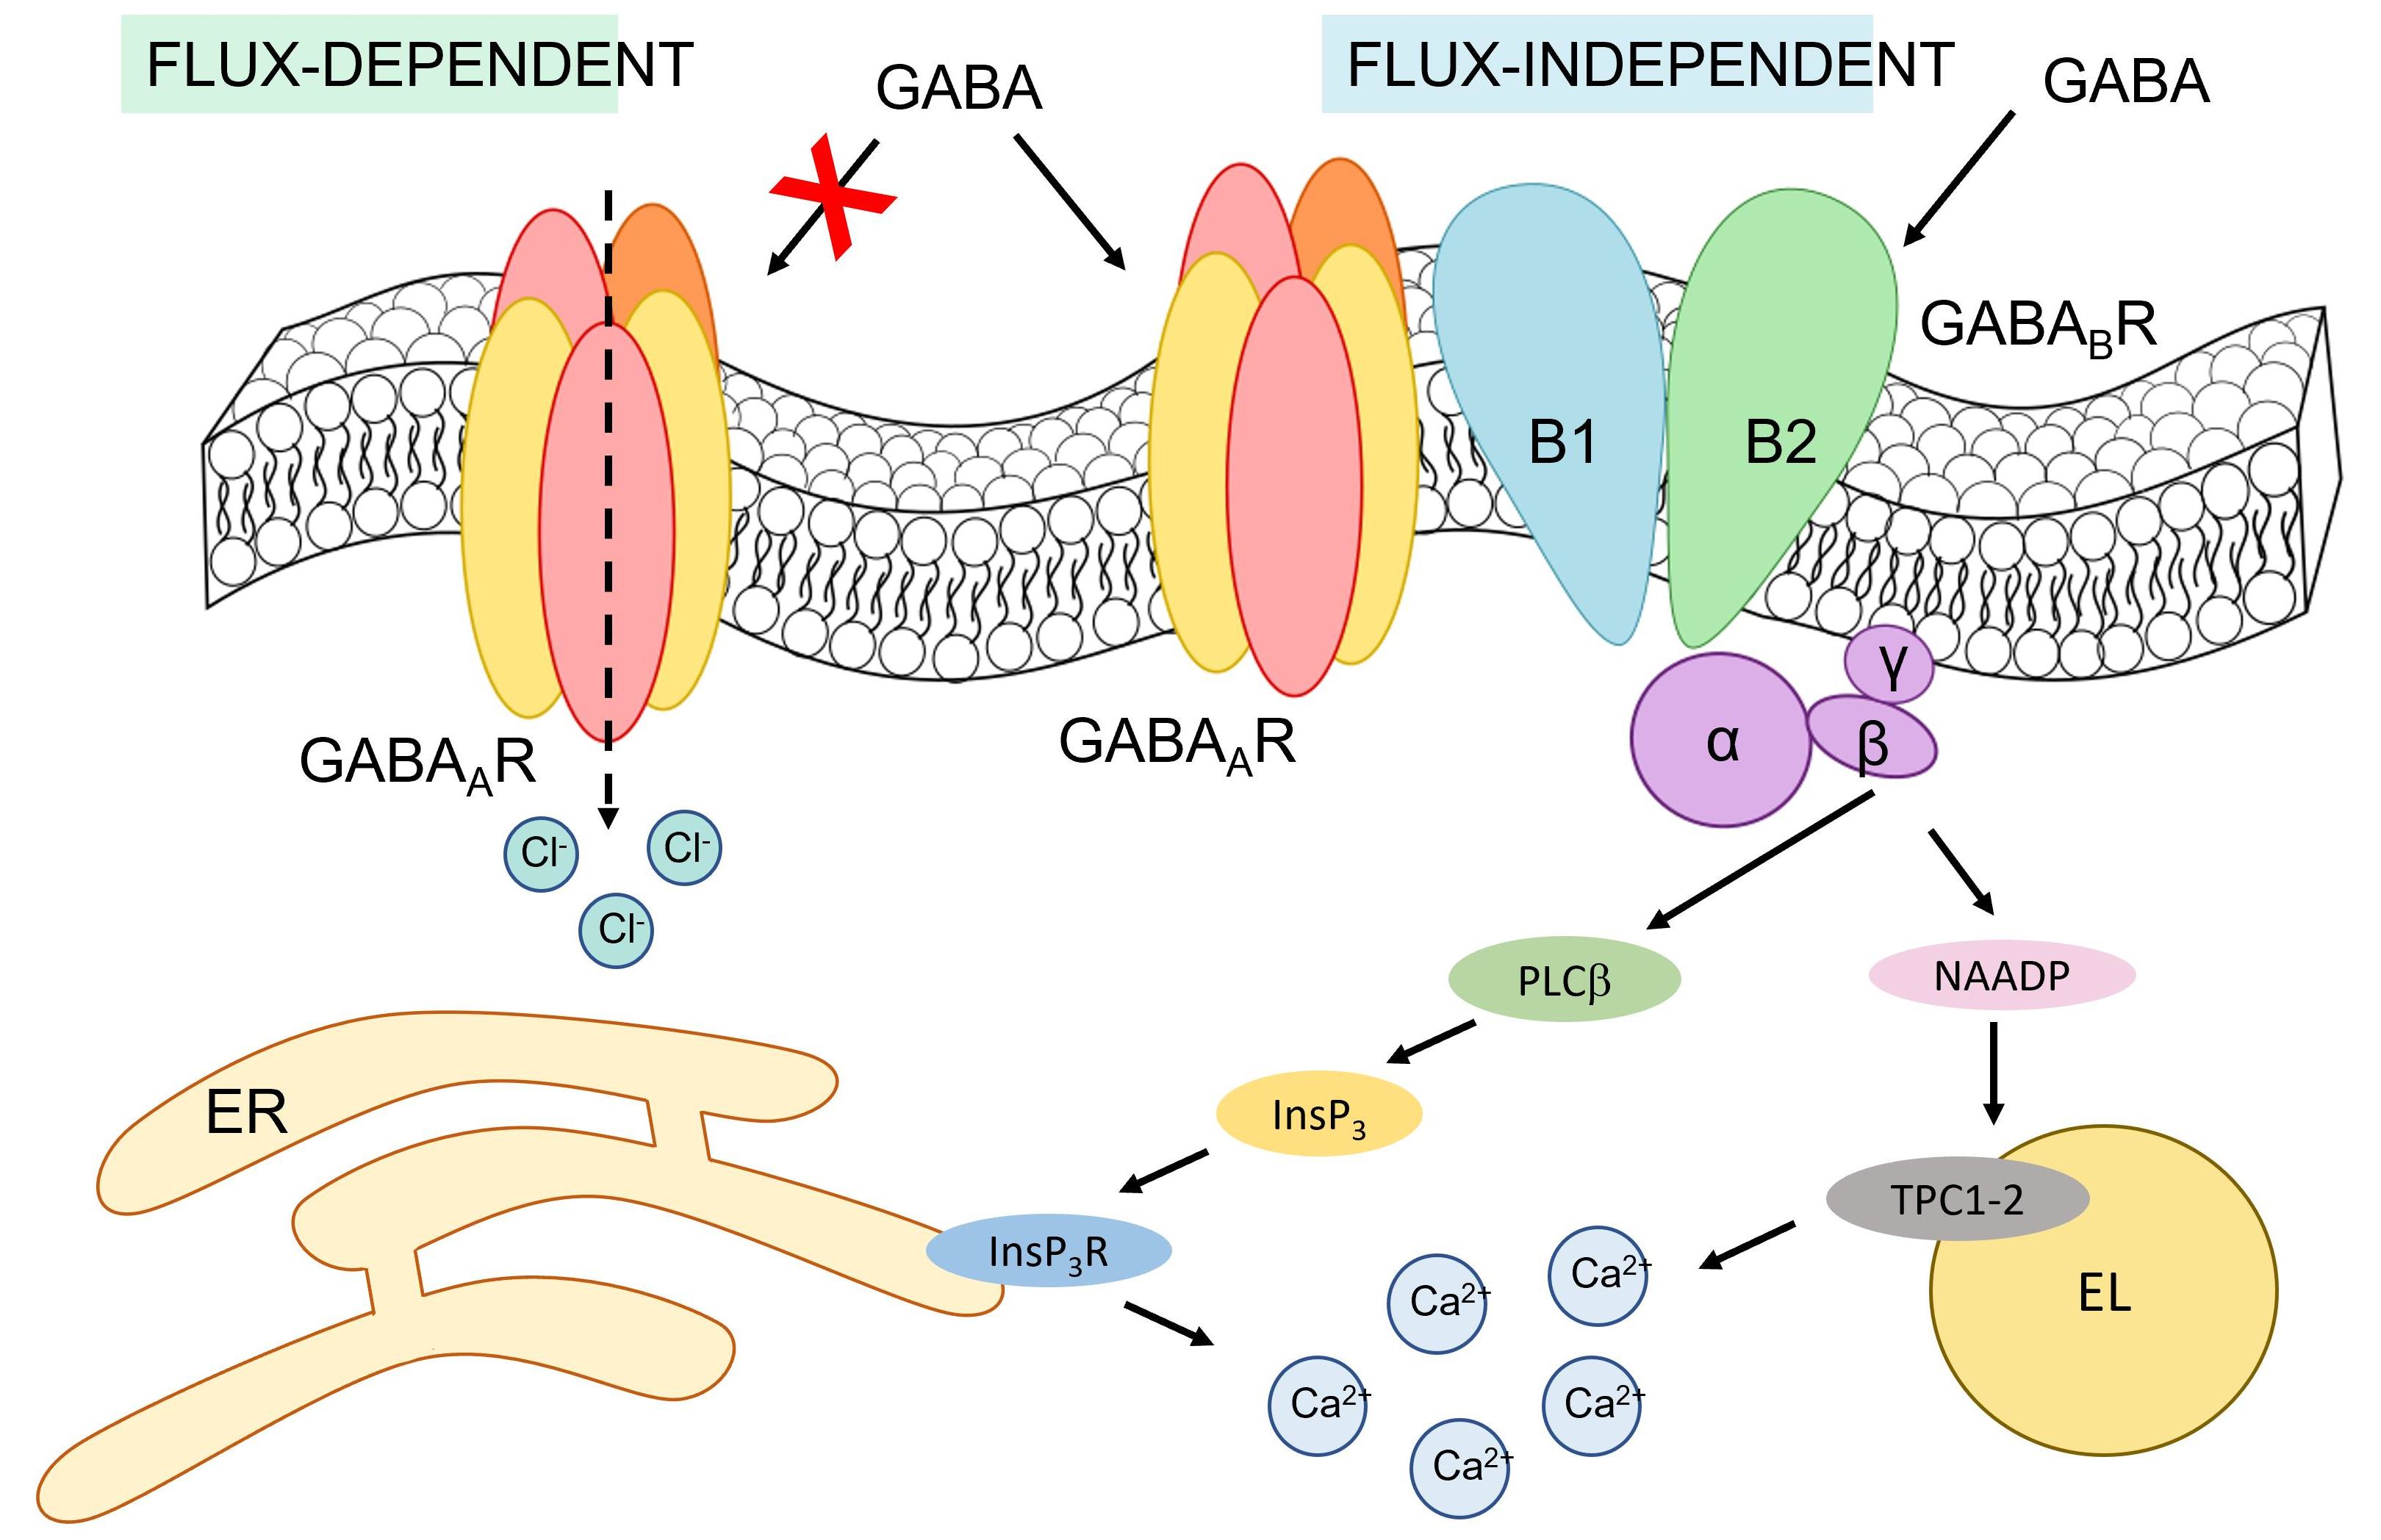 Cells | Free Full-Text | GABAA and Receptors Mediate GABA-Induced Intracellular Ca2+ Signals in Human Brain Microvascular Endothelial Cells